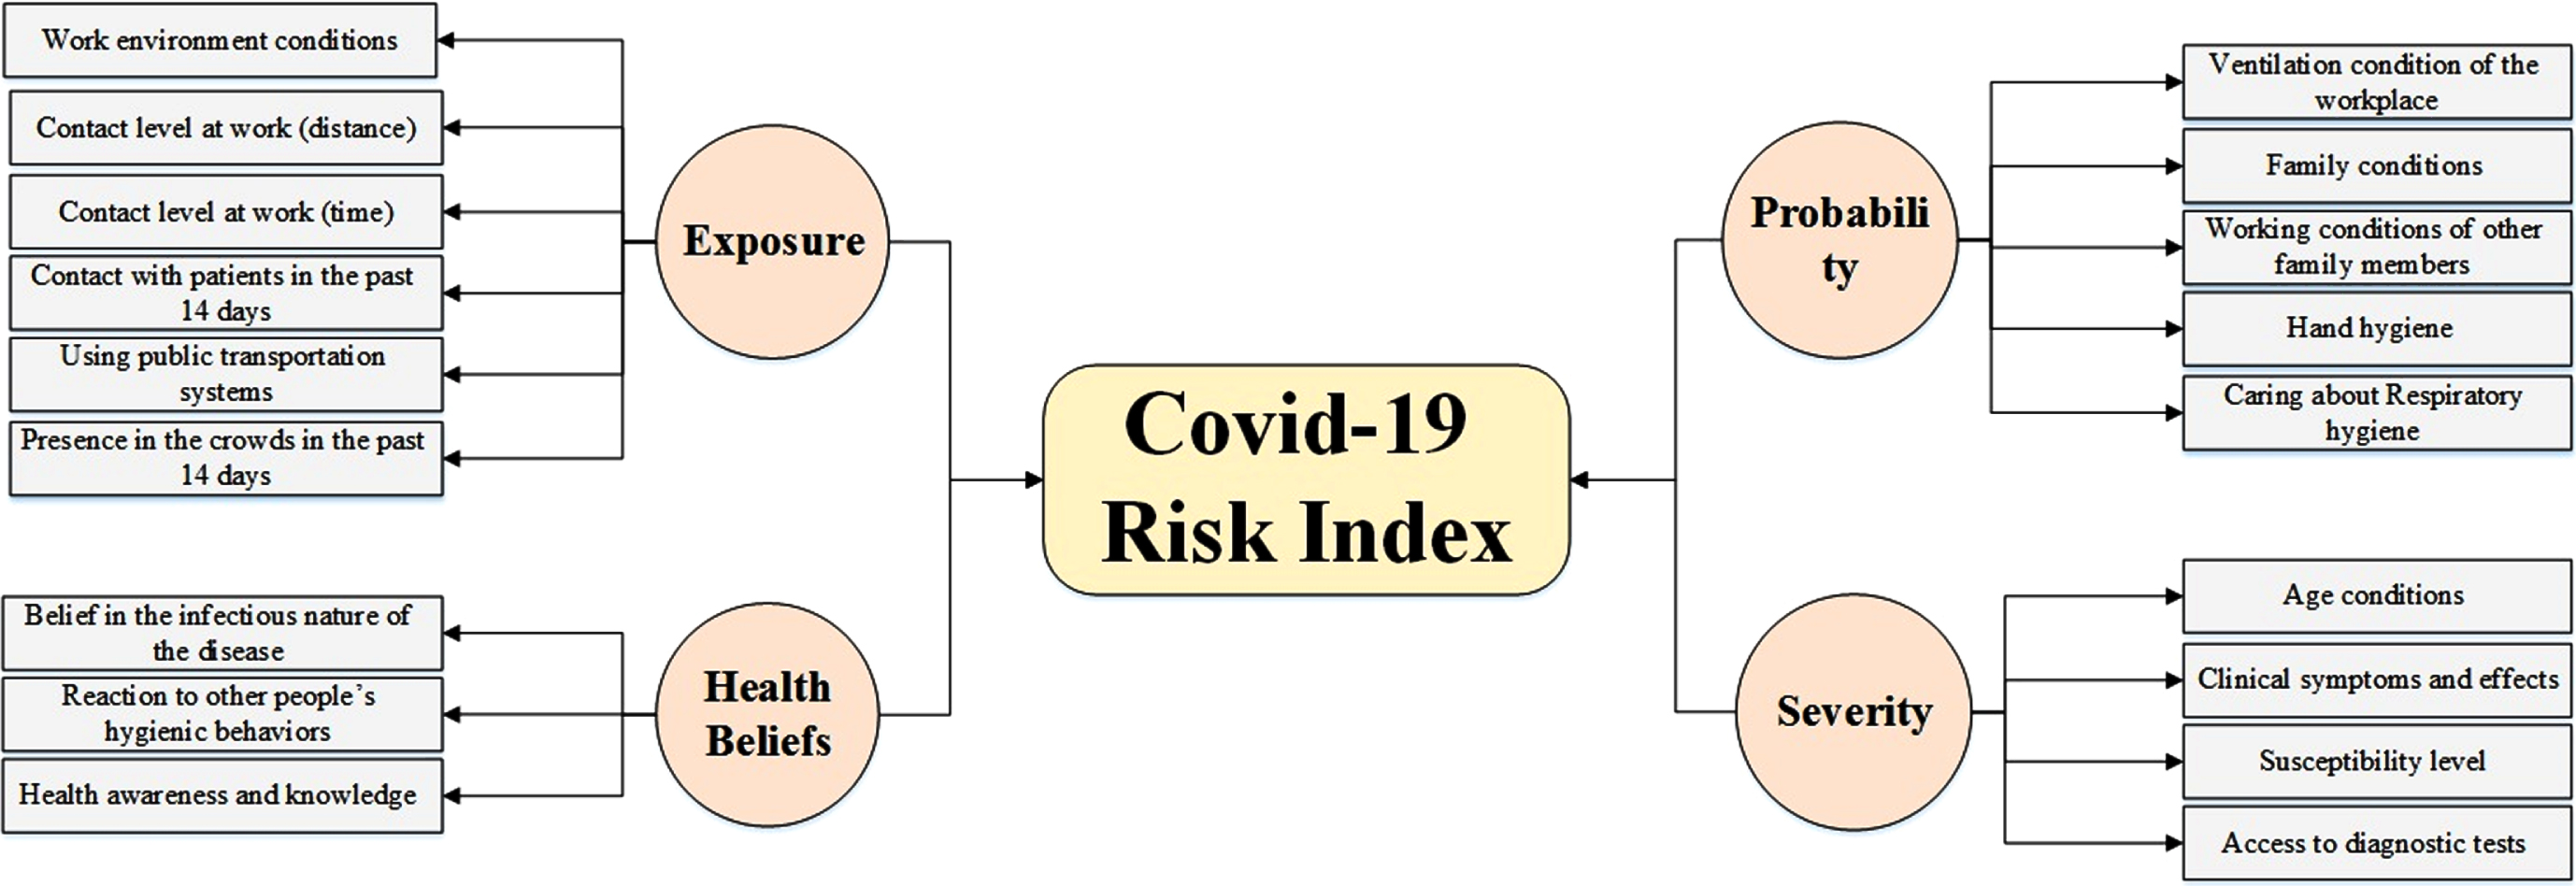 The hierarchy of components and factors affecting COVID-19 risk.